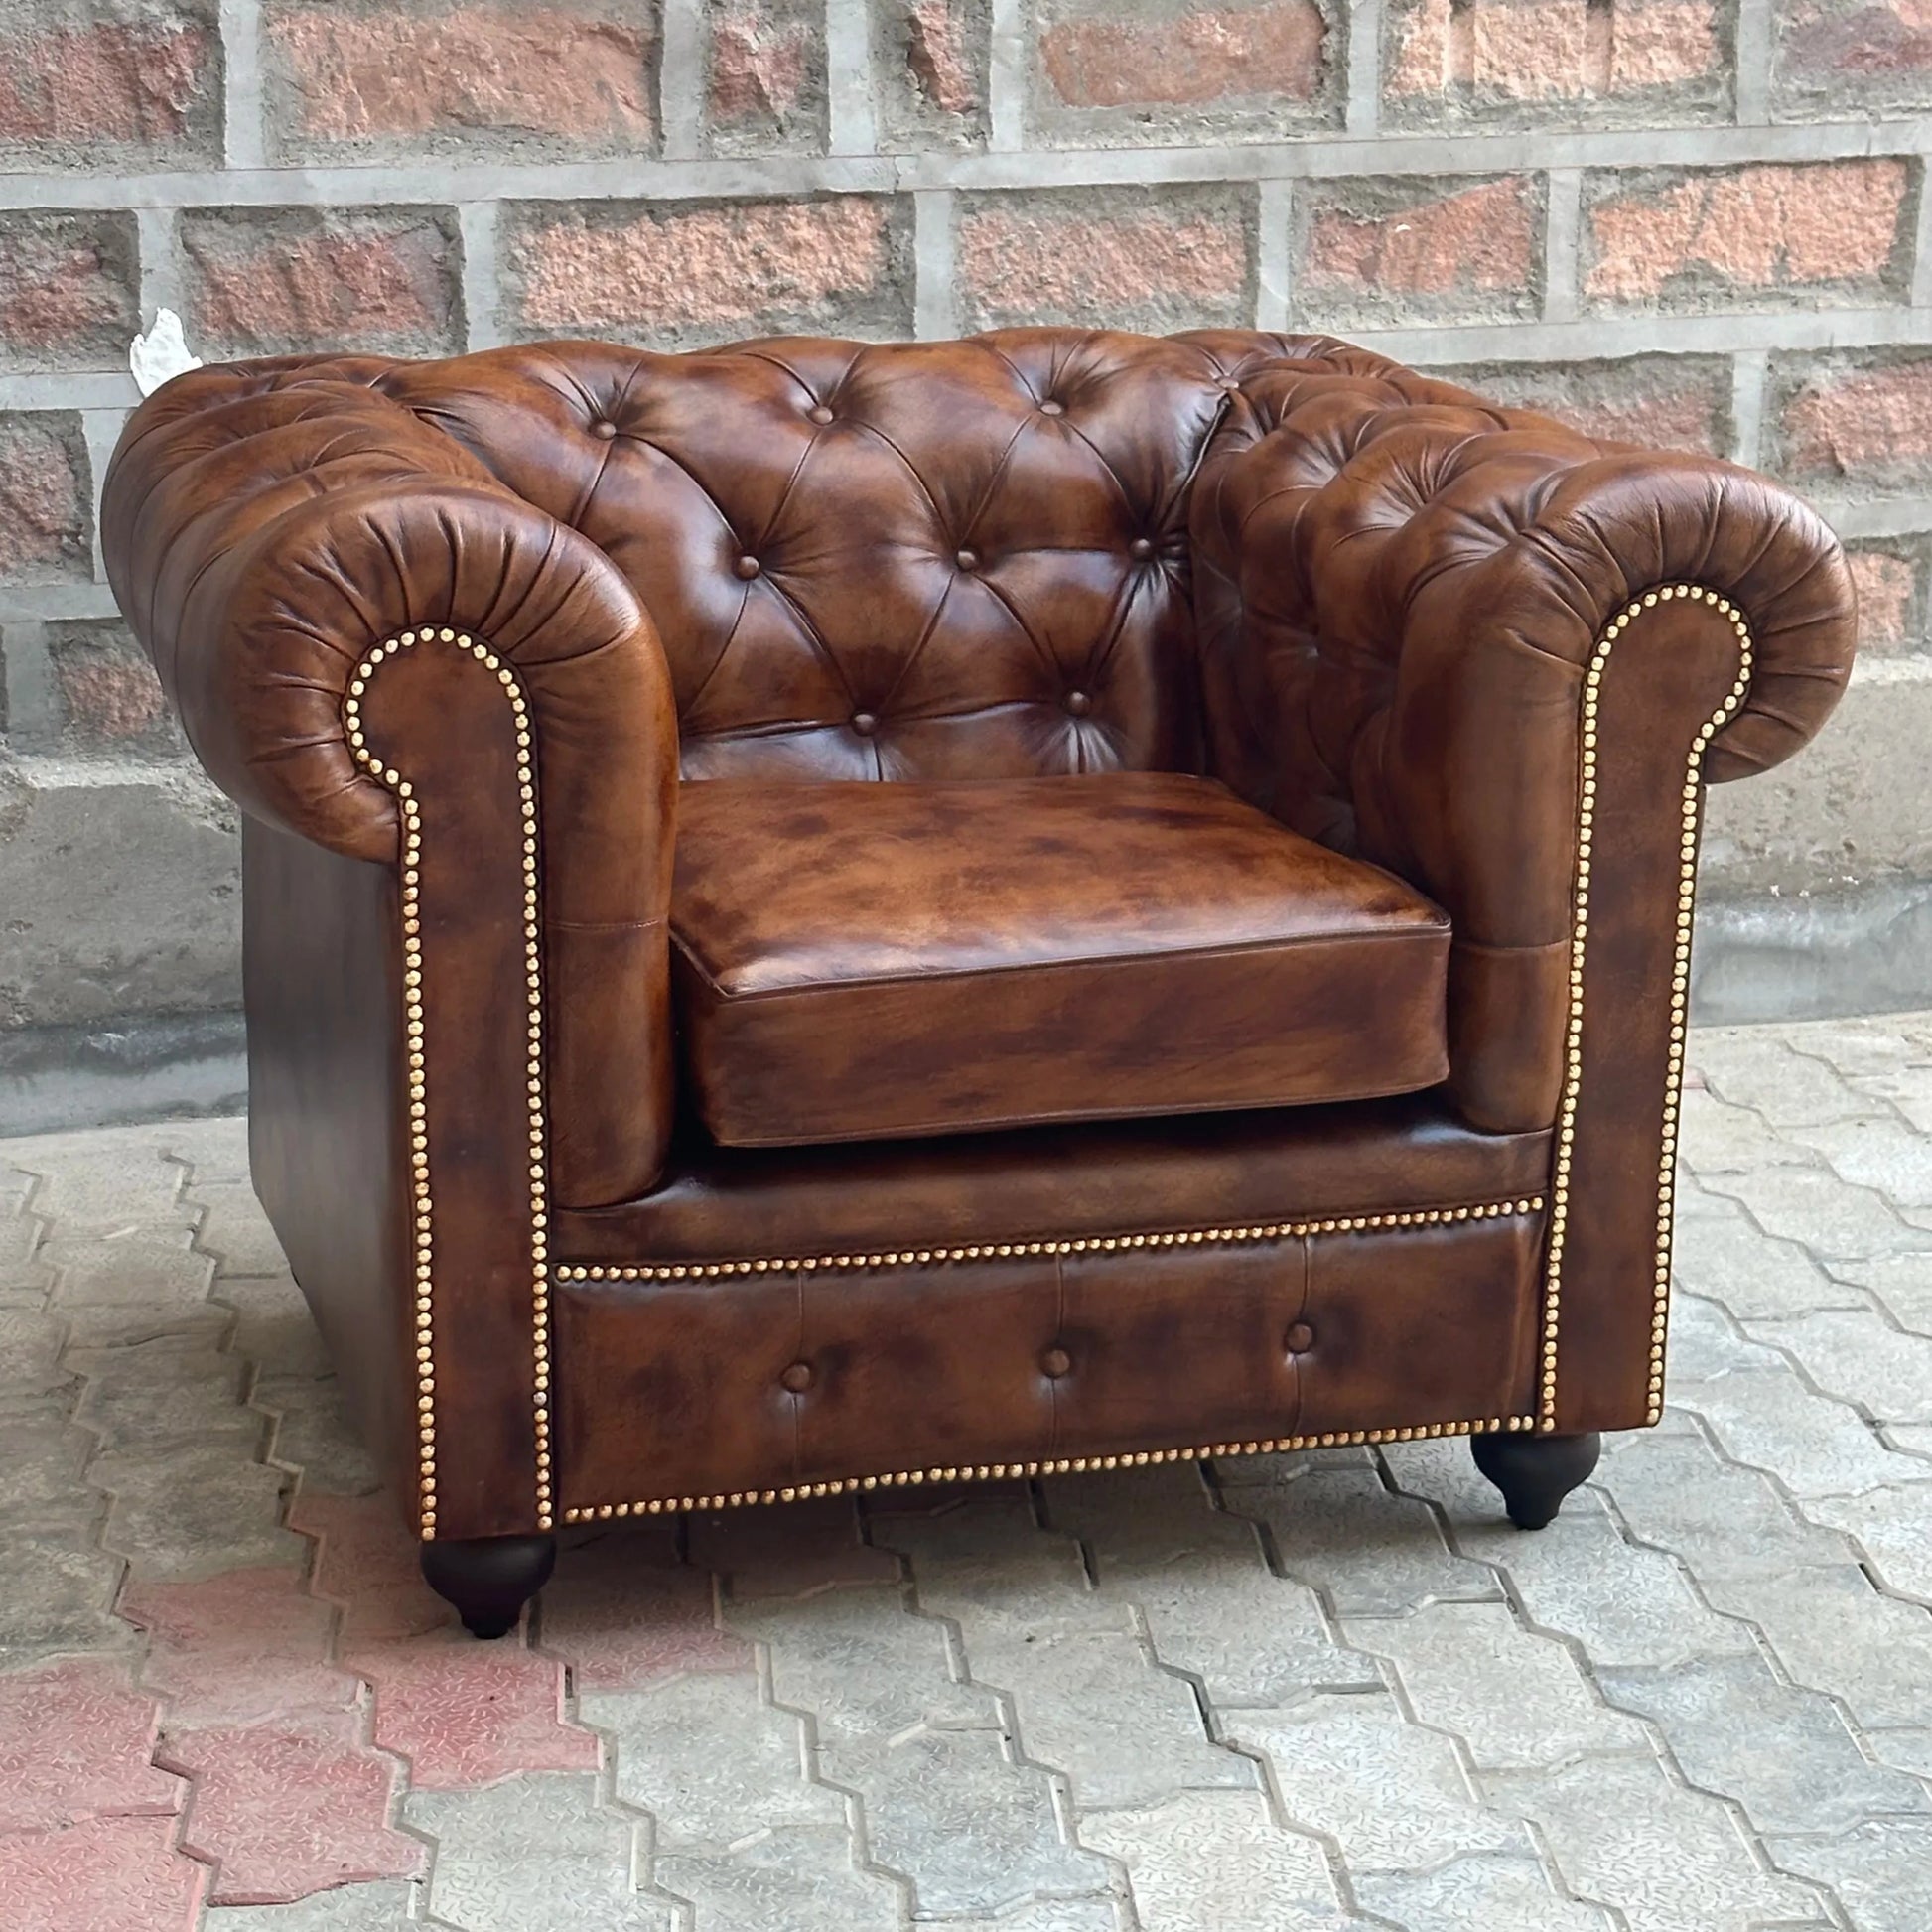 37" Armchair Normal Cushions | Winchester Chesterfield Leather Armchair with Normal Cushions (WI-1C) by Rising Tide Design Co.